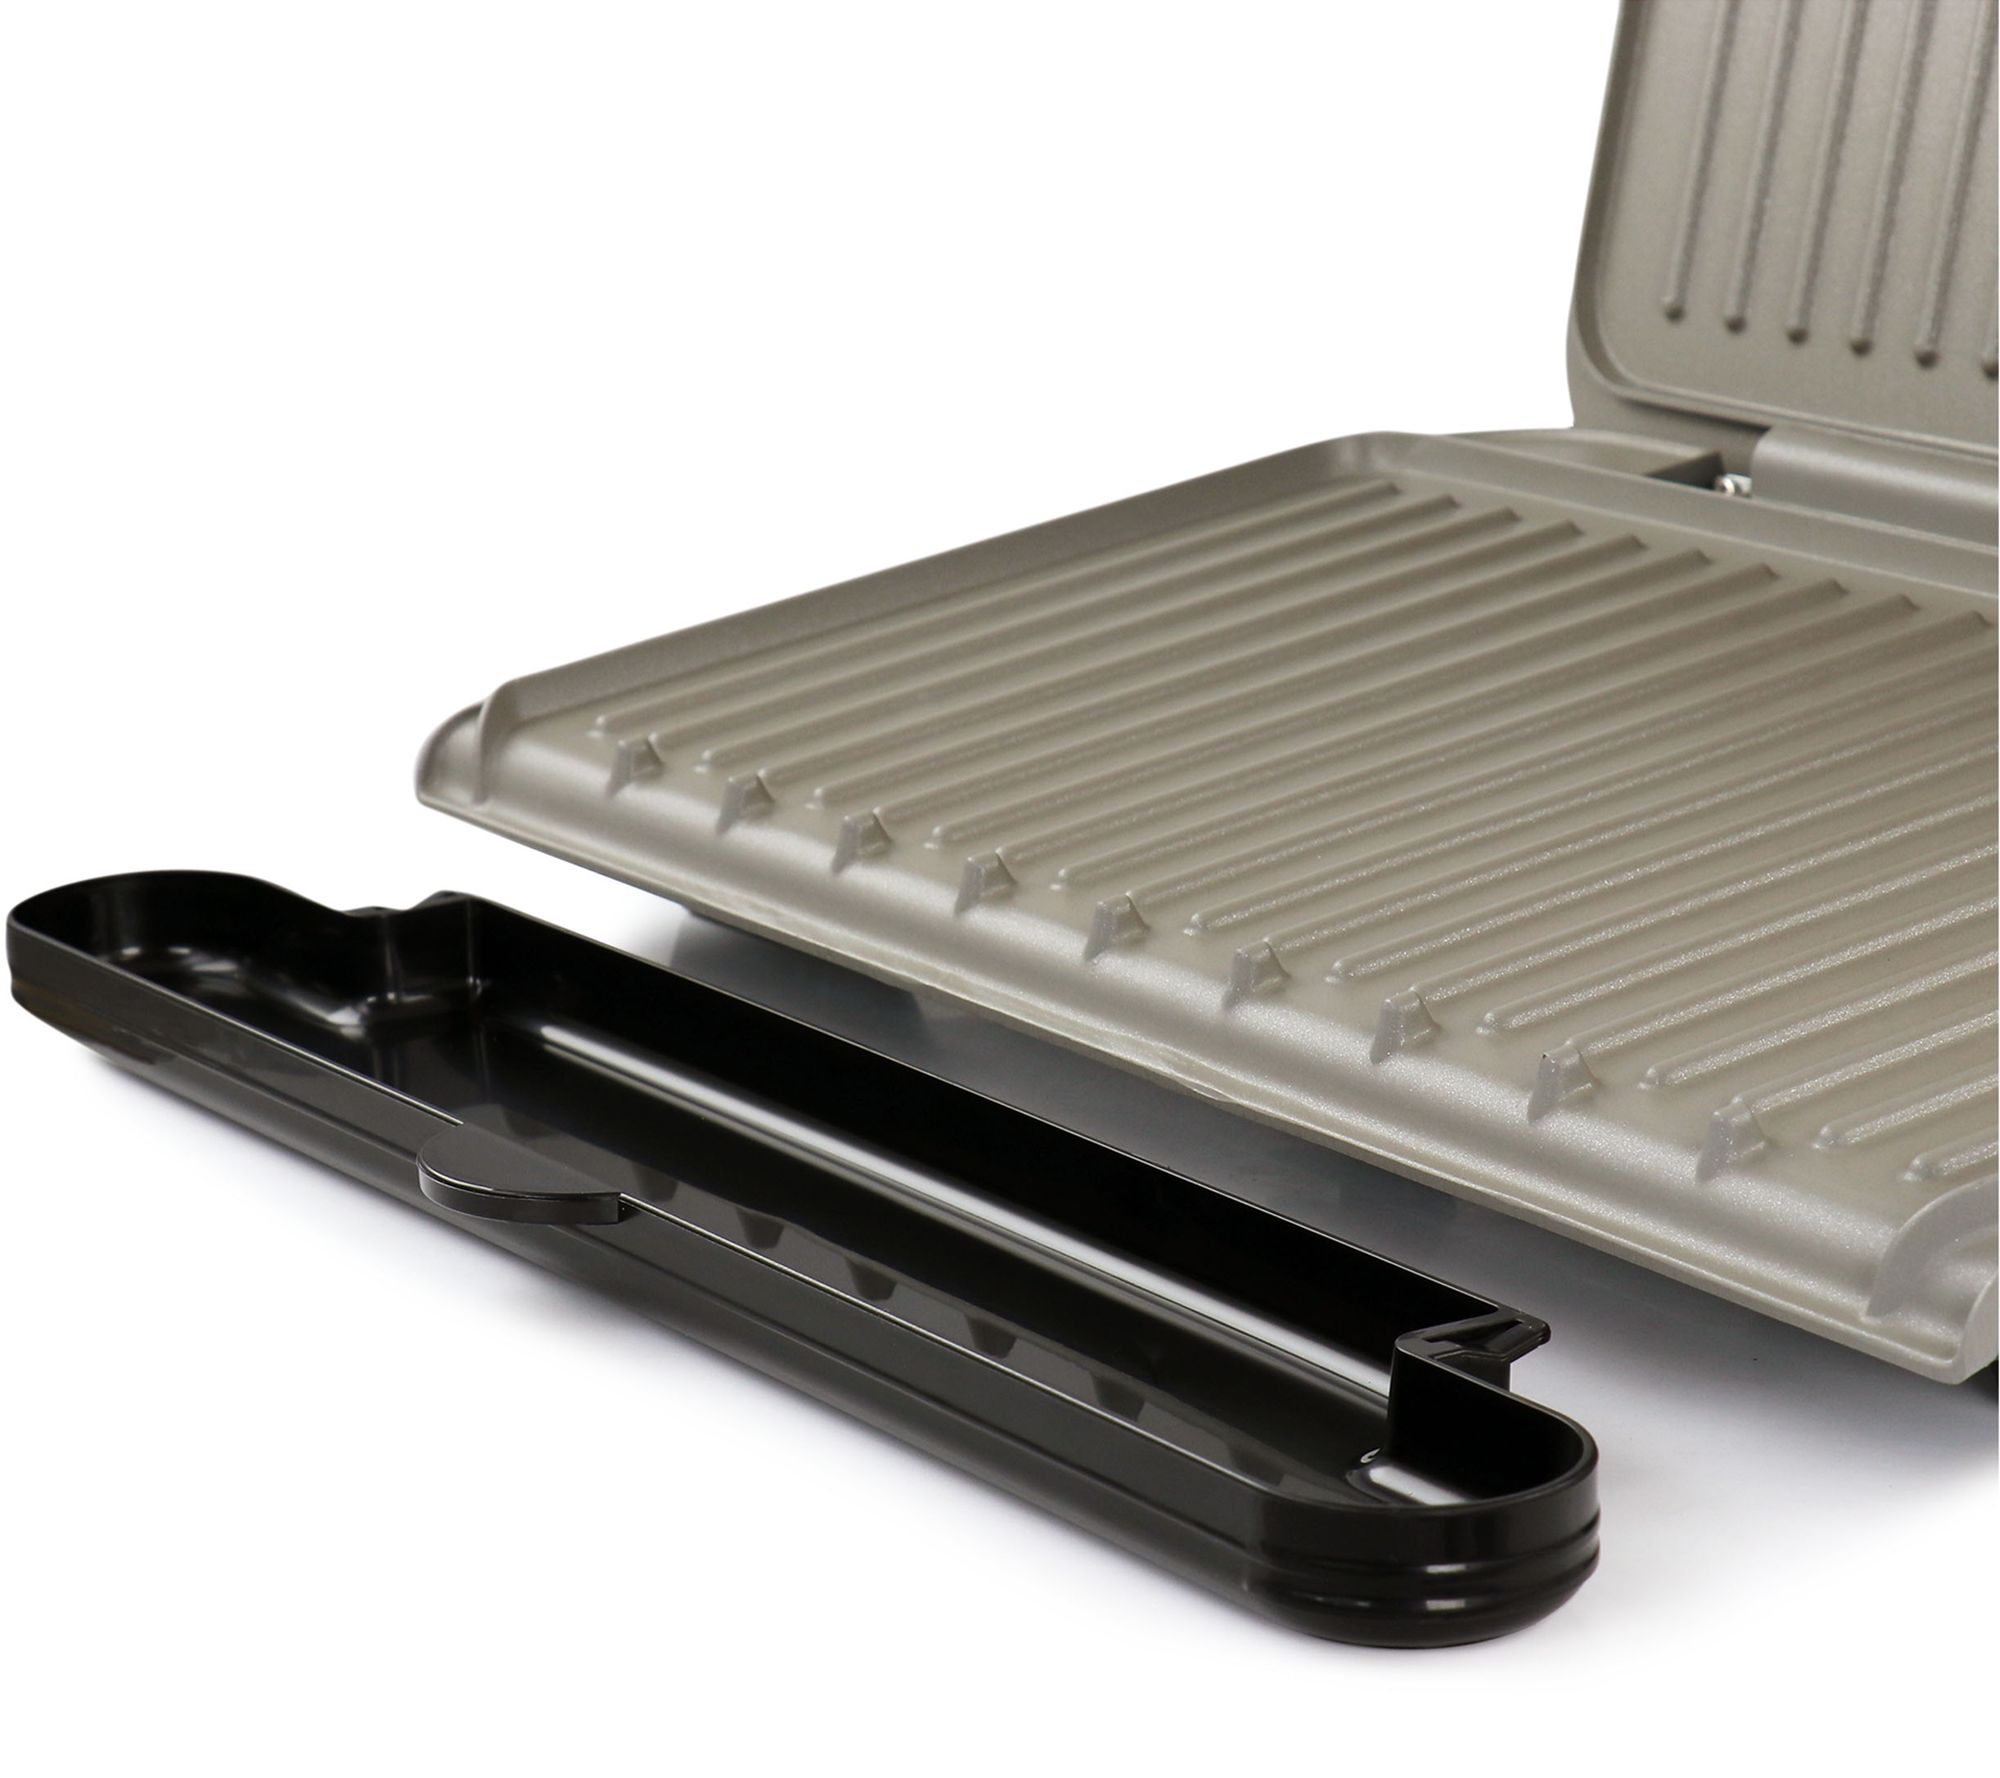 George Foreman 9-Serving Electric Indoor Grill W/ Panini Press on QVC 